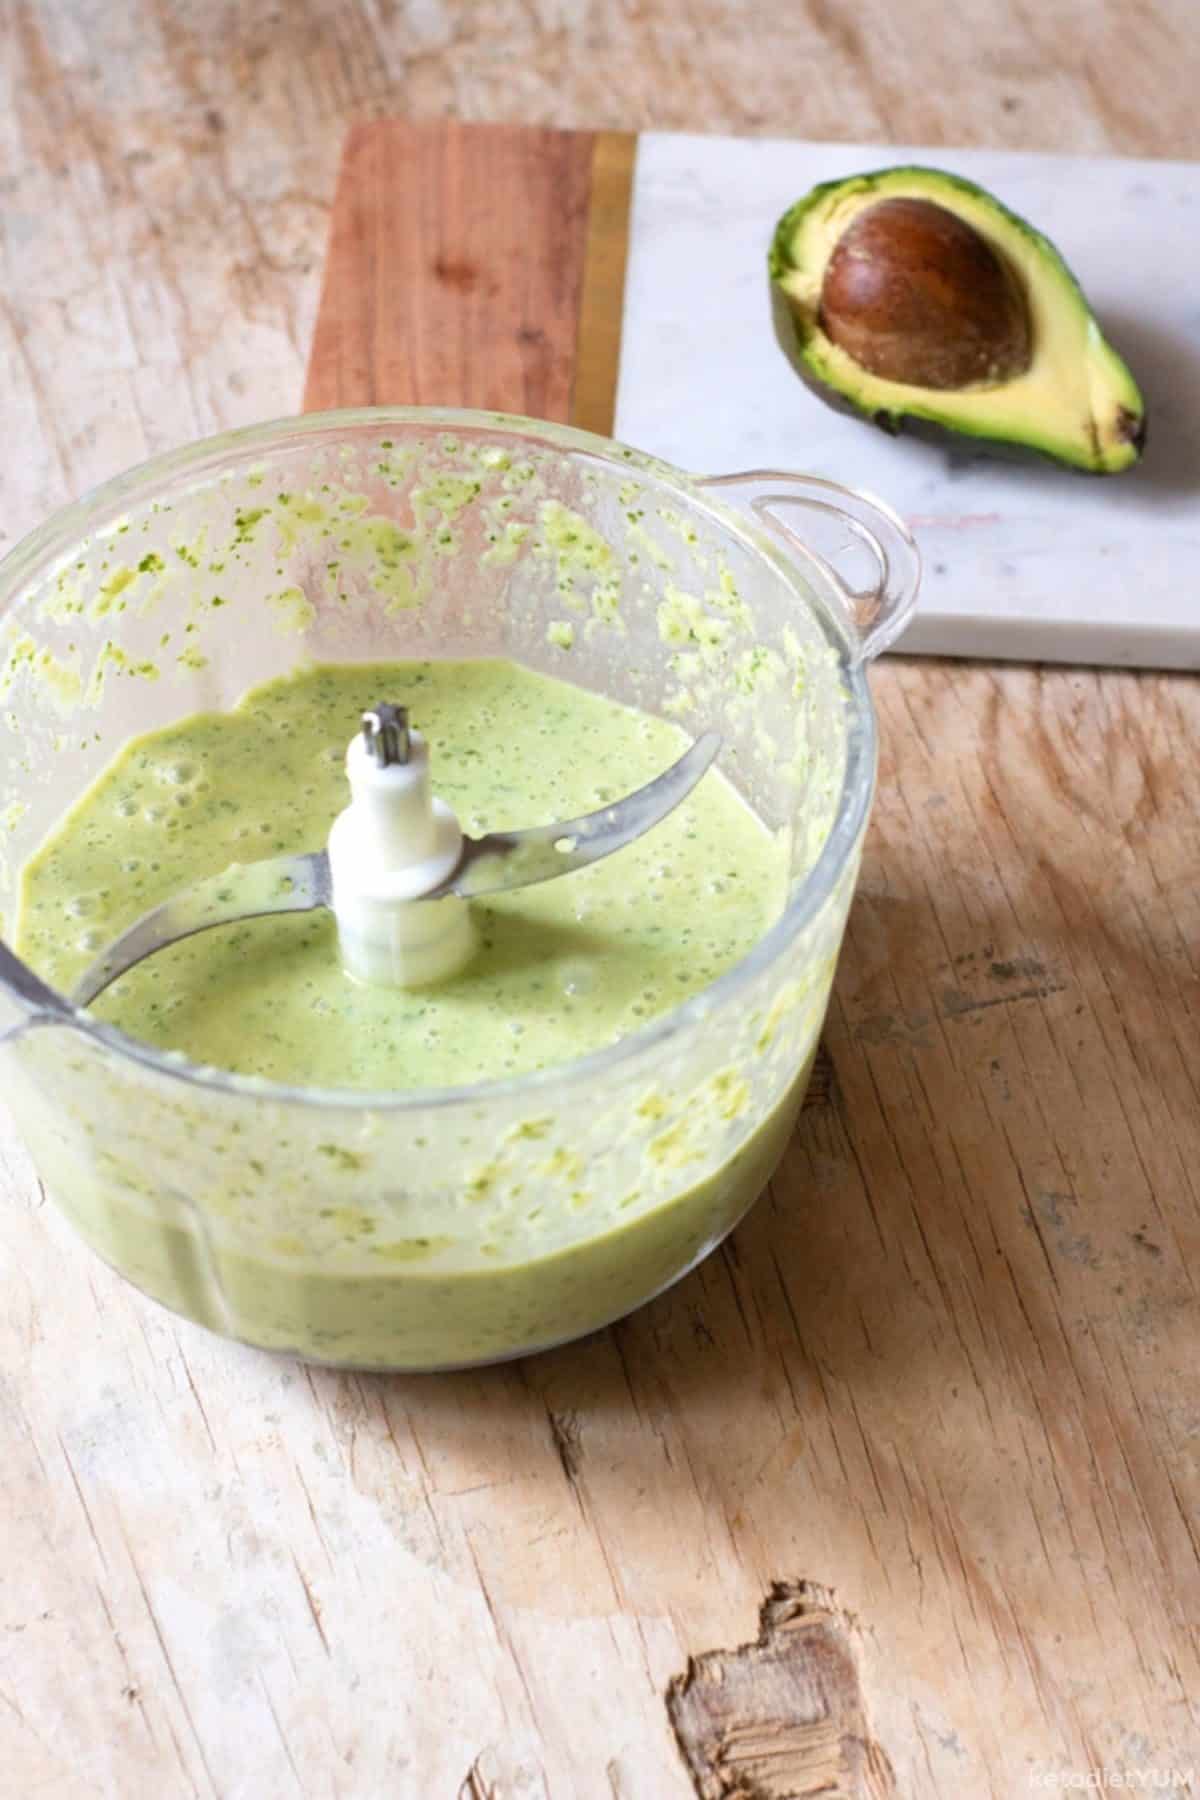 Adding all the ingredients to a blender to make a keto kale smoothie